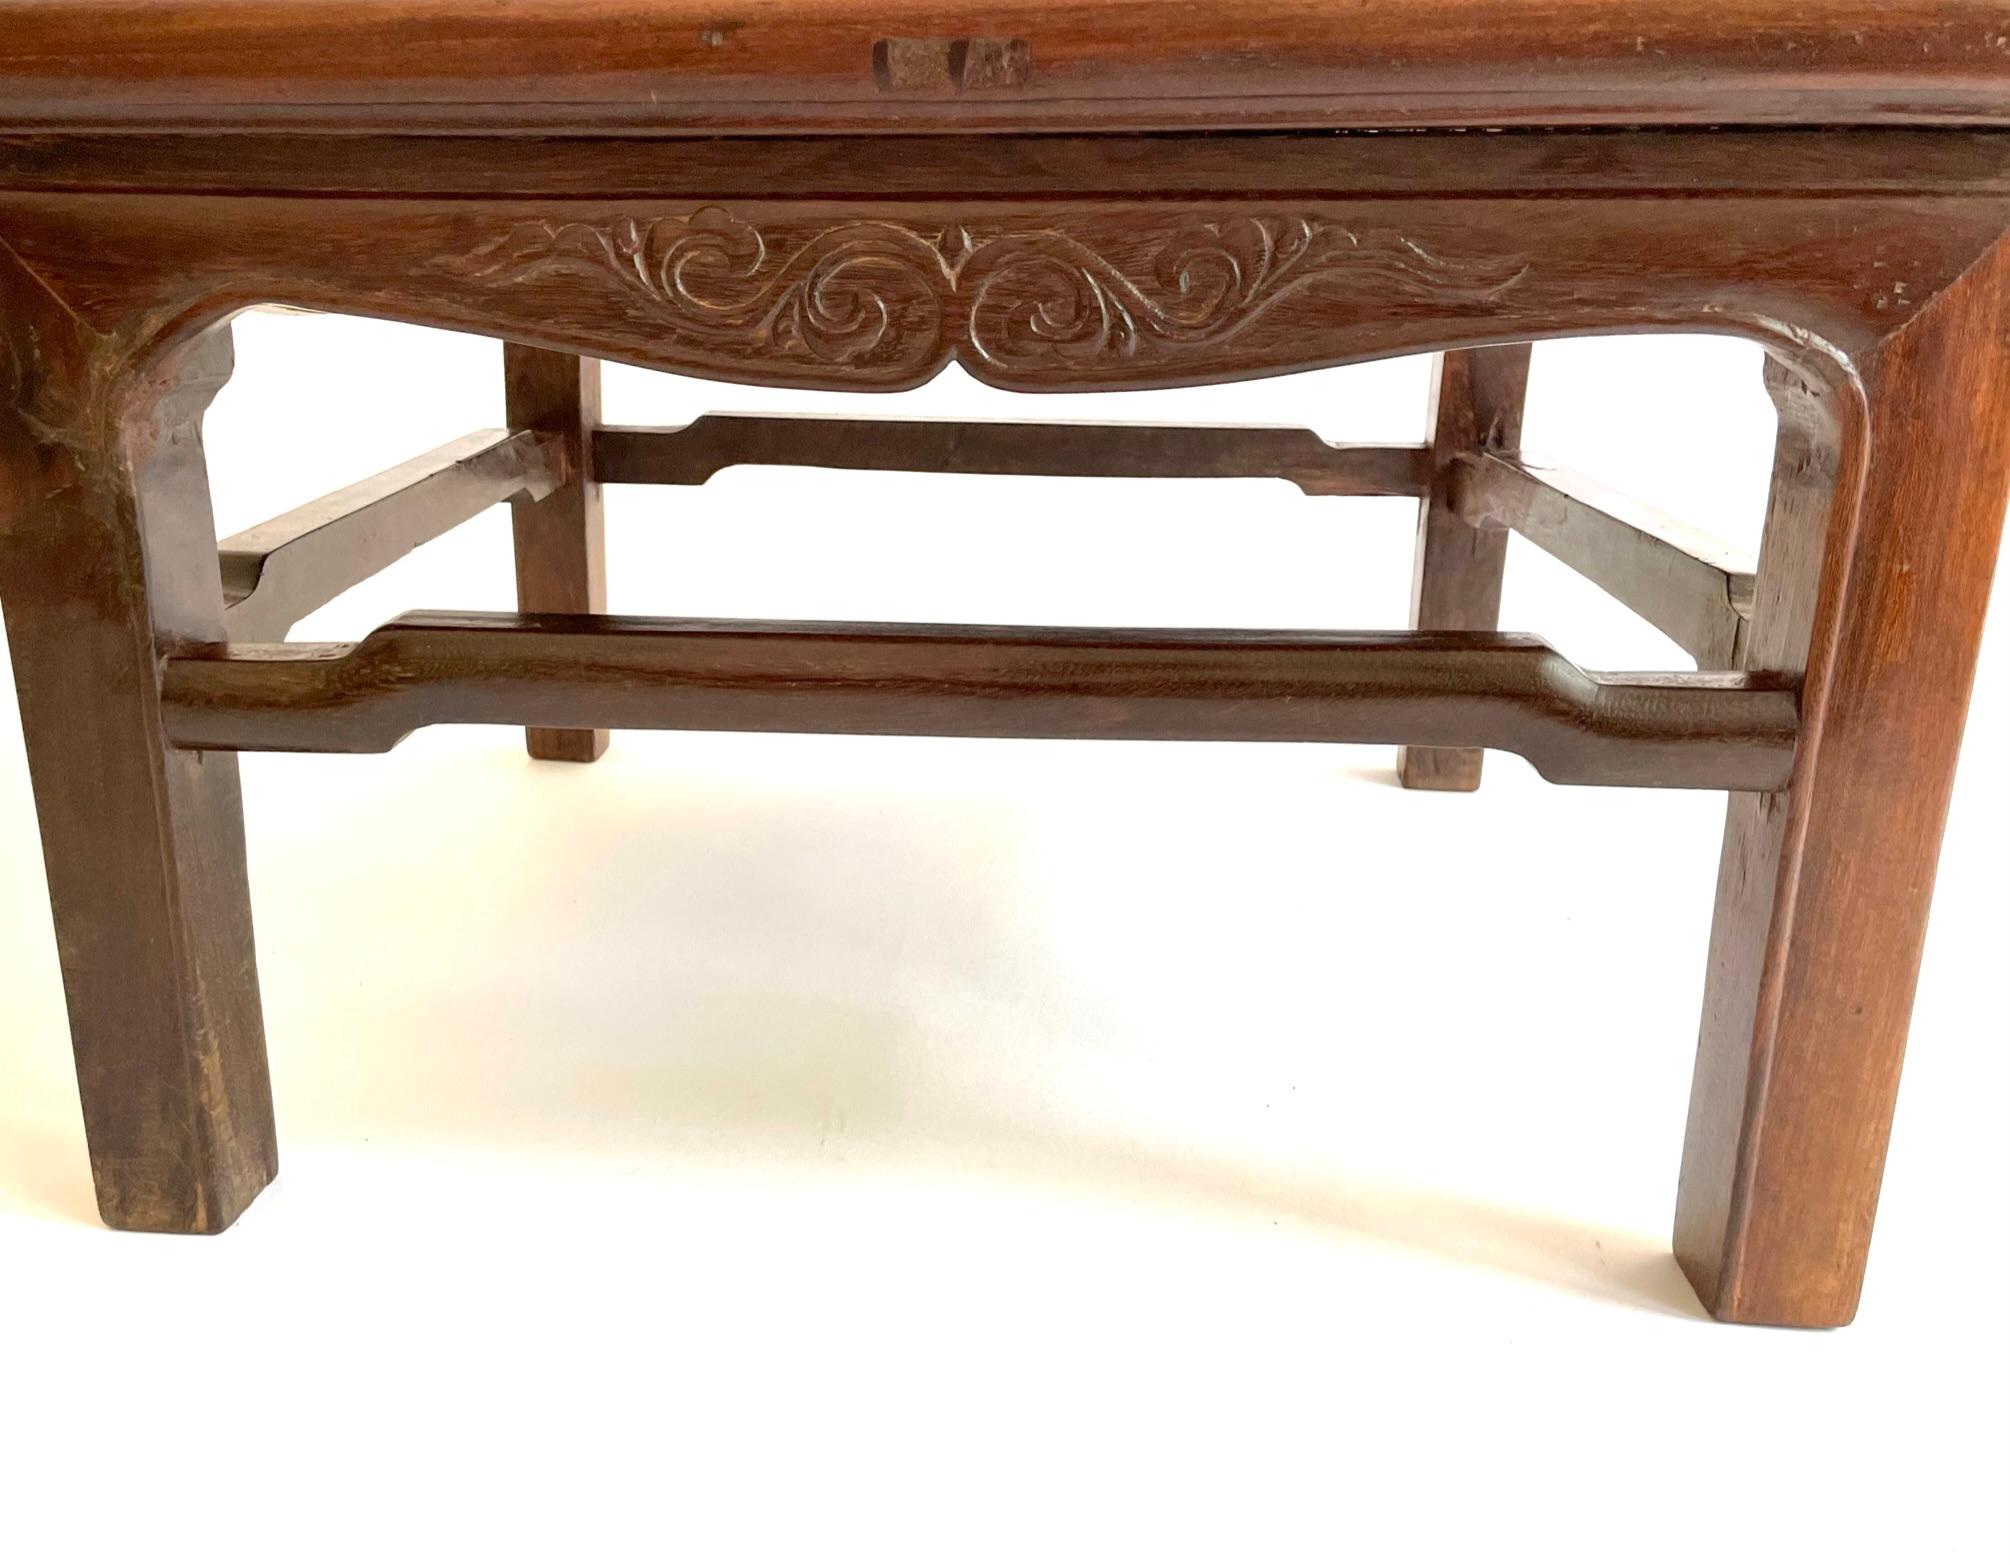 Hand-Carved 19th Century Chinese Ironwood (Teilimu) Kang Table For Sale